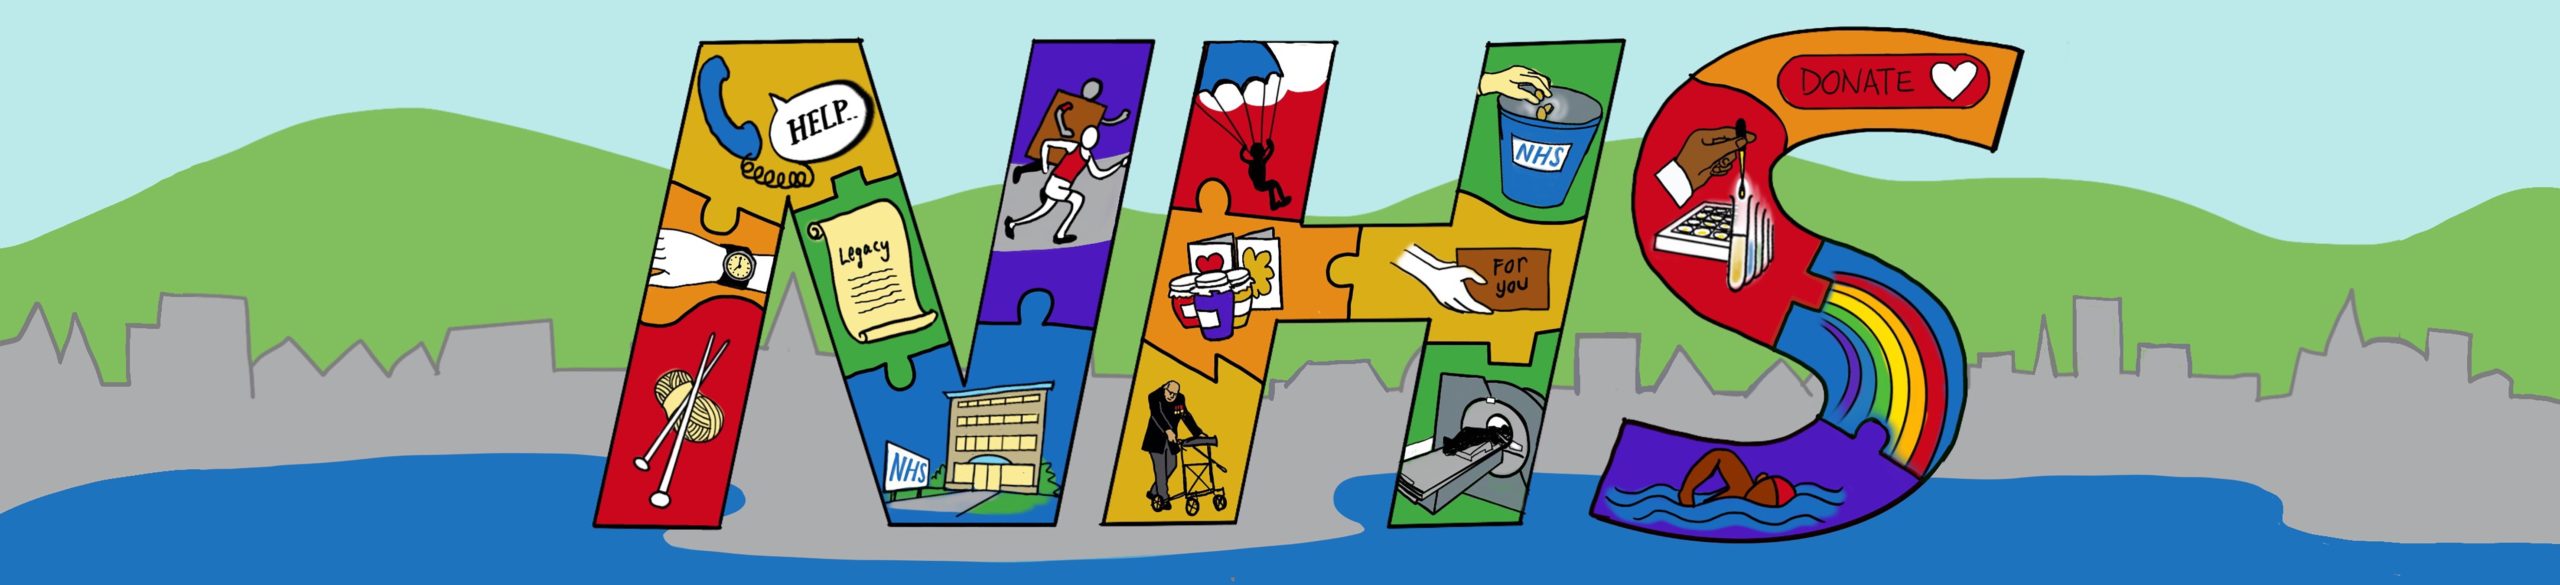 Image shows large letters N H S against a landscape of blue sea, grey city and green hills. The brightly coloured letters are filled like a jigsaw with illustrations of charity fundraising and delivery activities. These include (left to right) knitting, volunteer time, helplines, legacies, NHS buildings, sponsored runs, parachute jumps, jam and crafts, Captain Tom, bucket-shaking, donated box “for you”, scanner, online donation, scientific lab, a rainbow and sponsored swimming.